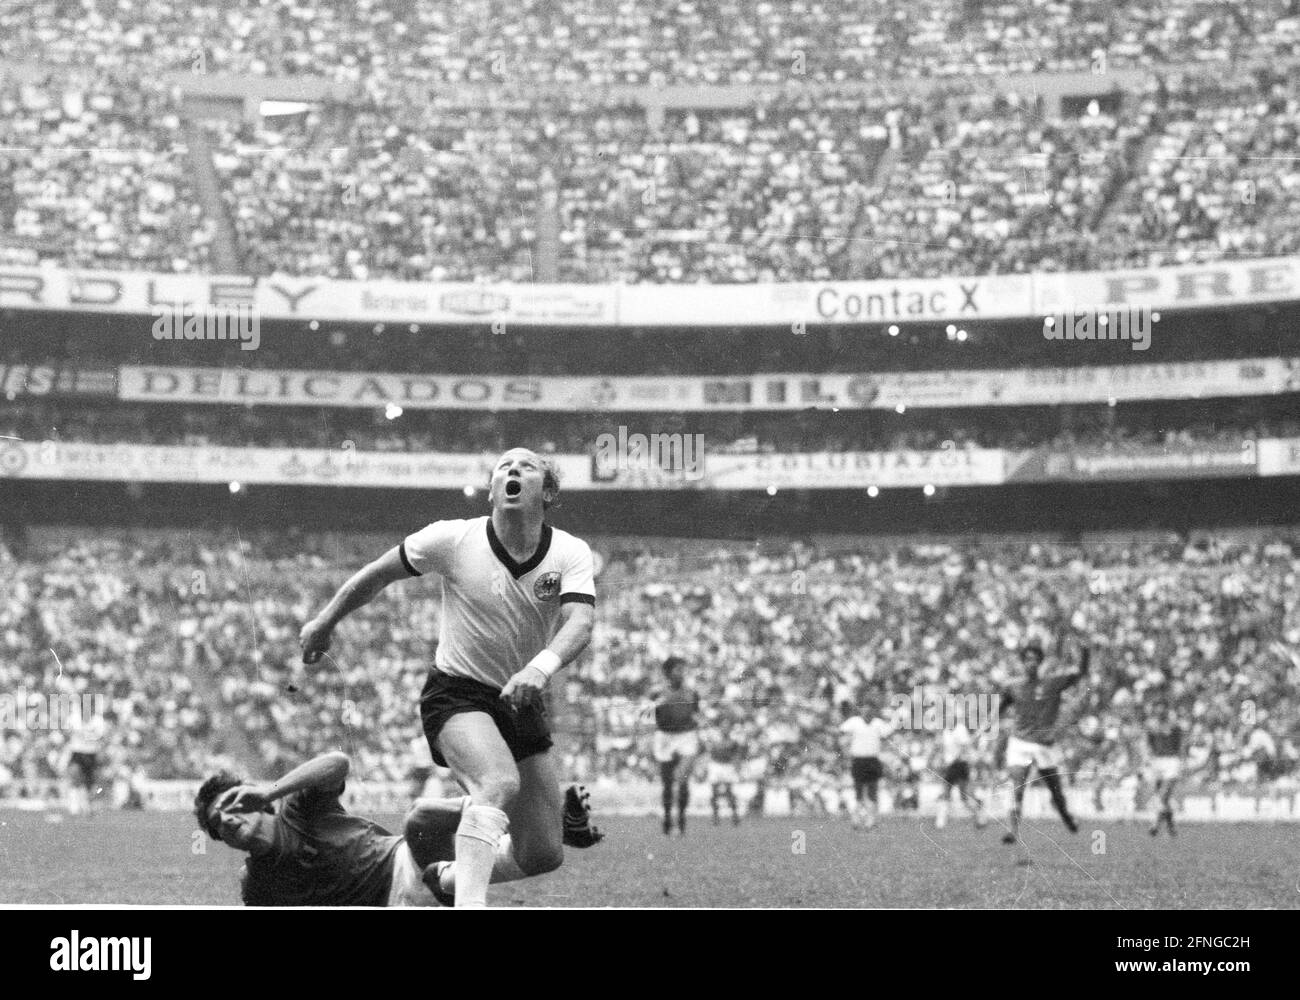 World Cup 1970: Germany - Italy 3:4 n.V. on 17.06.1970 in Mexico City.  Uwe Seeler (Deut.) action, looking after the ball.  No model release ! [automated translation] Stock Photo